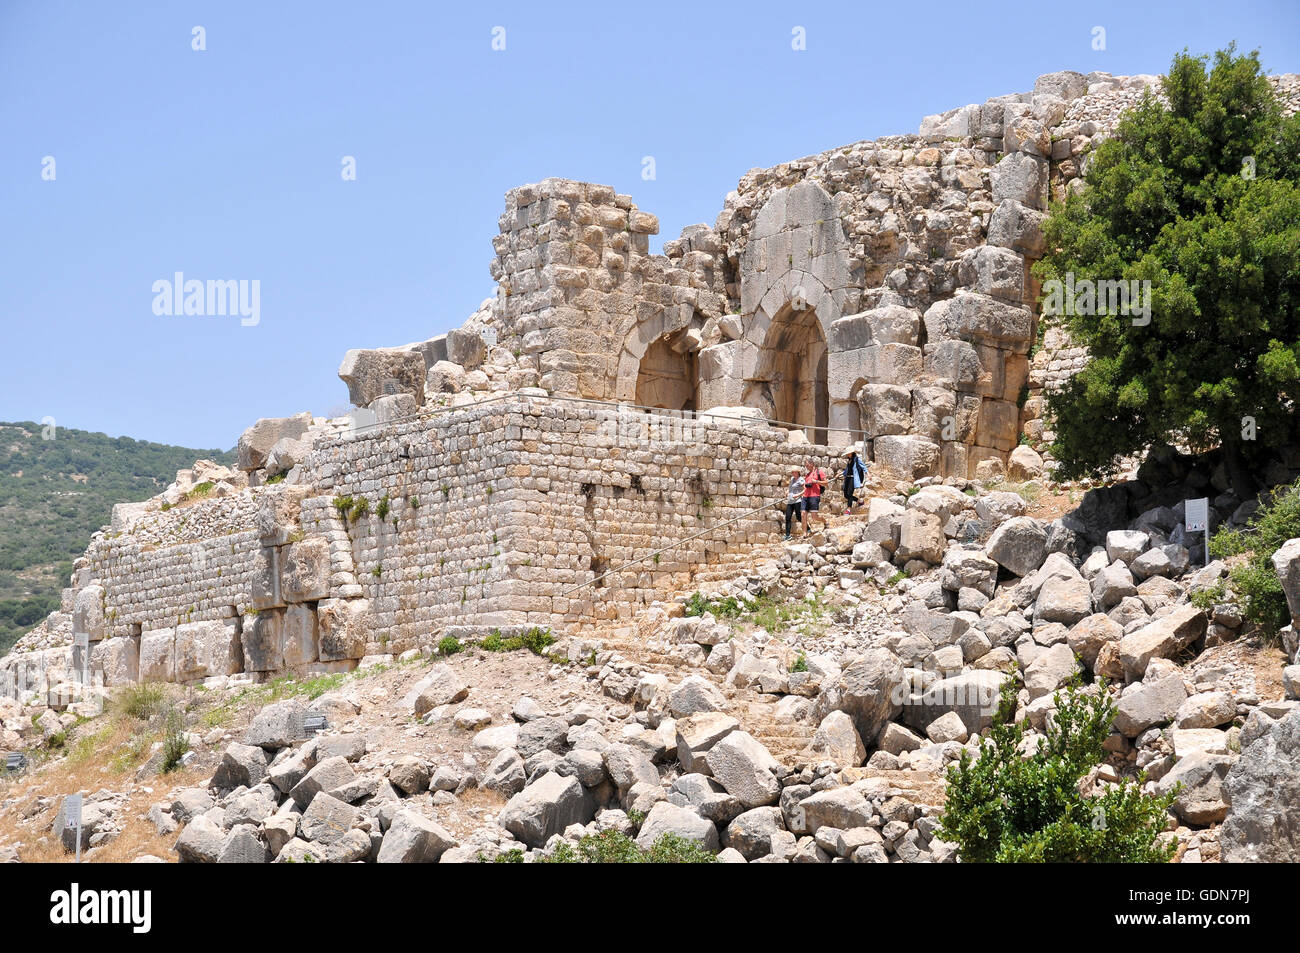 The Nimrod (Namrud) Fortress or Nimrod Castle is a medieval Muslim castle situated on the southern slopes of Mount Hermon, on a Stock Photo